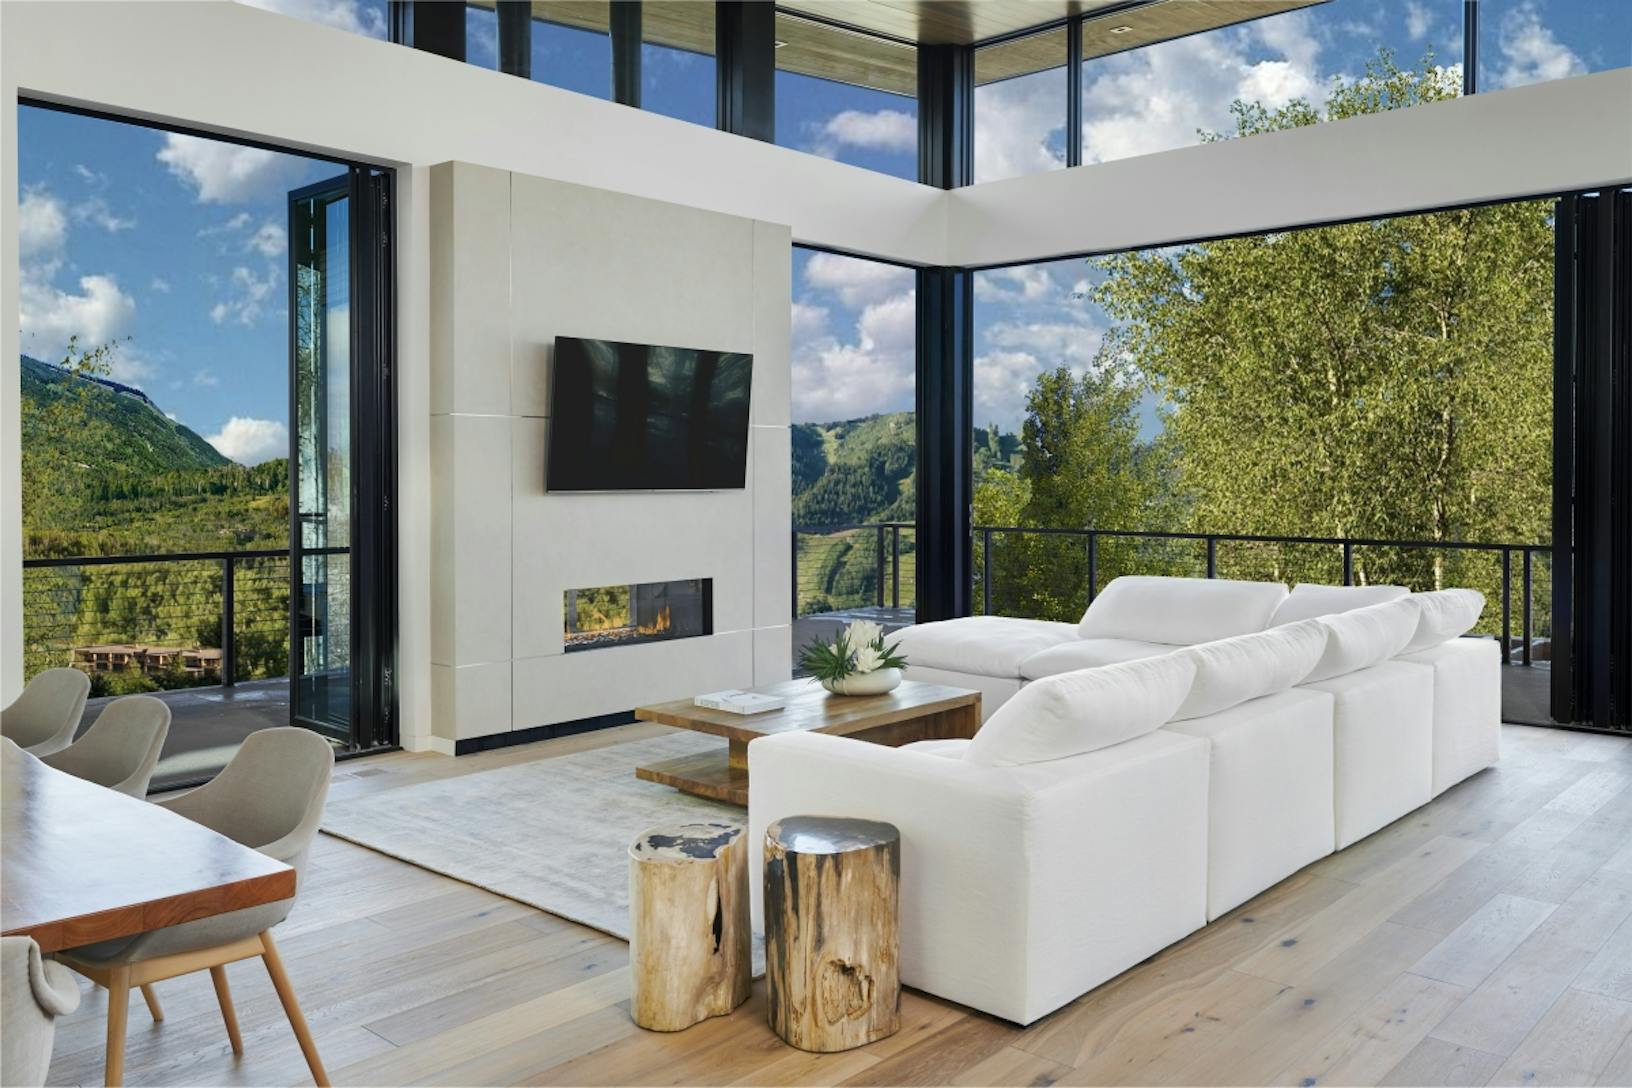 Modern living room with folding patio doors and large windows offering a panoramic view of a forested mountain landscape